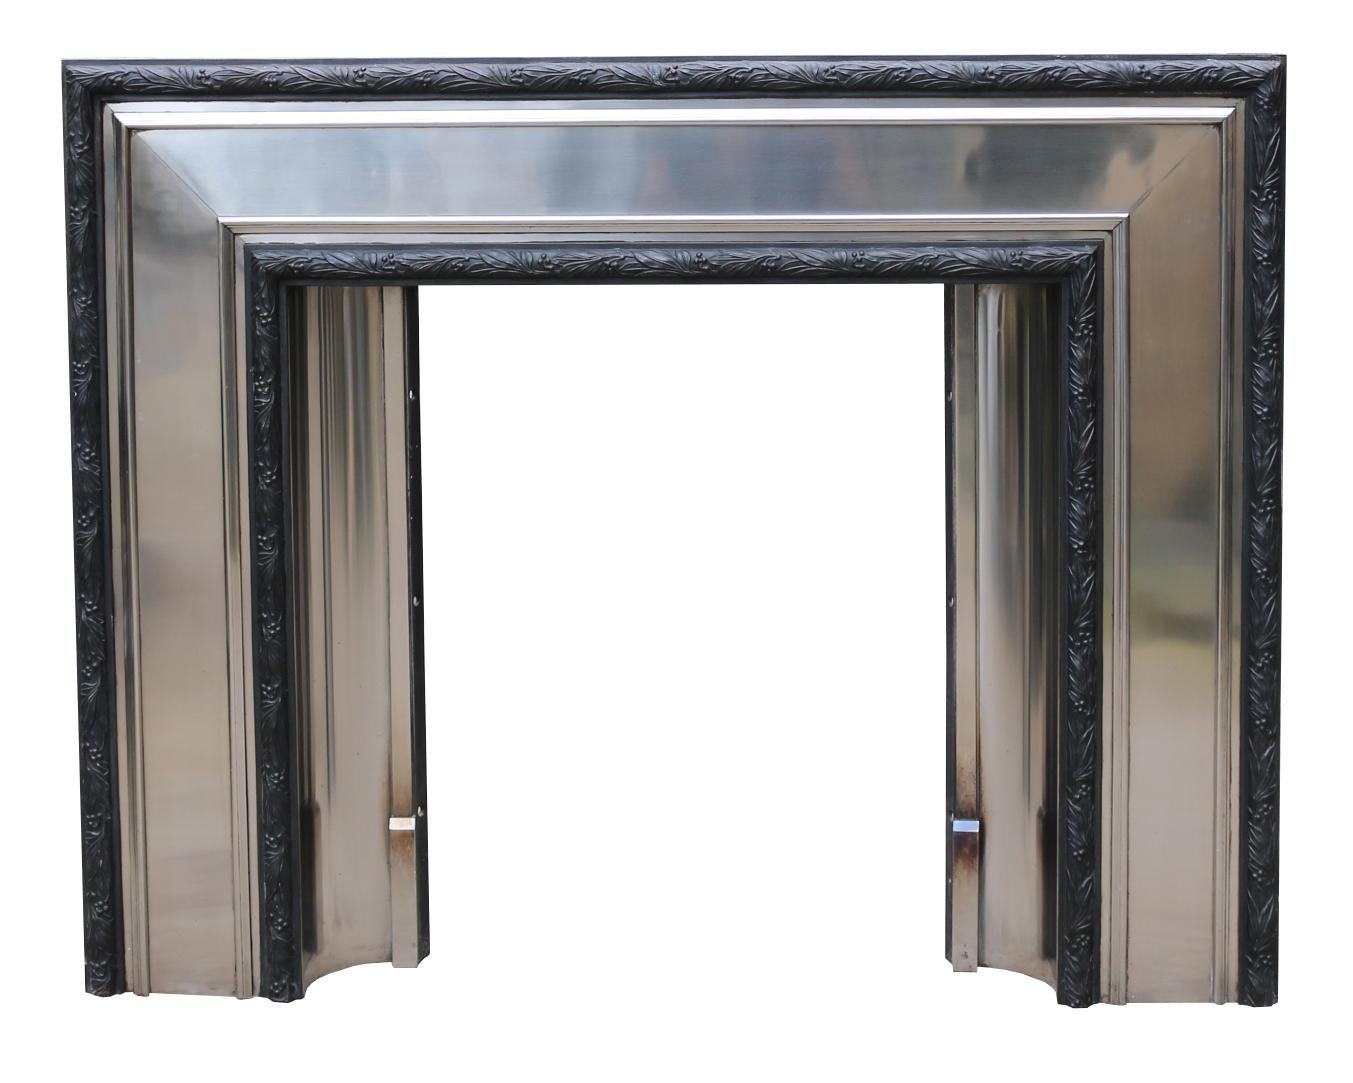 20th Century Art Deco Stainless Steel and Cast Iron Fireplace Surround